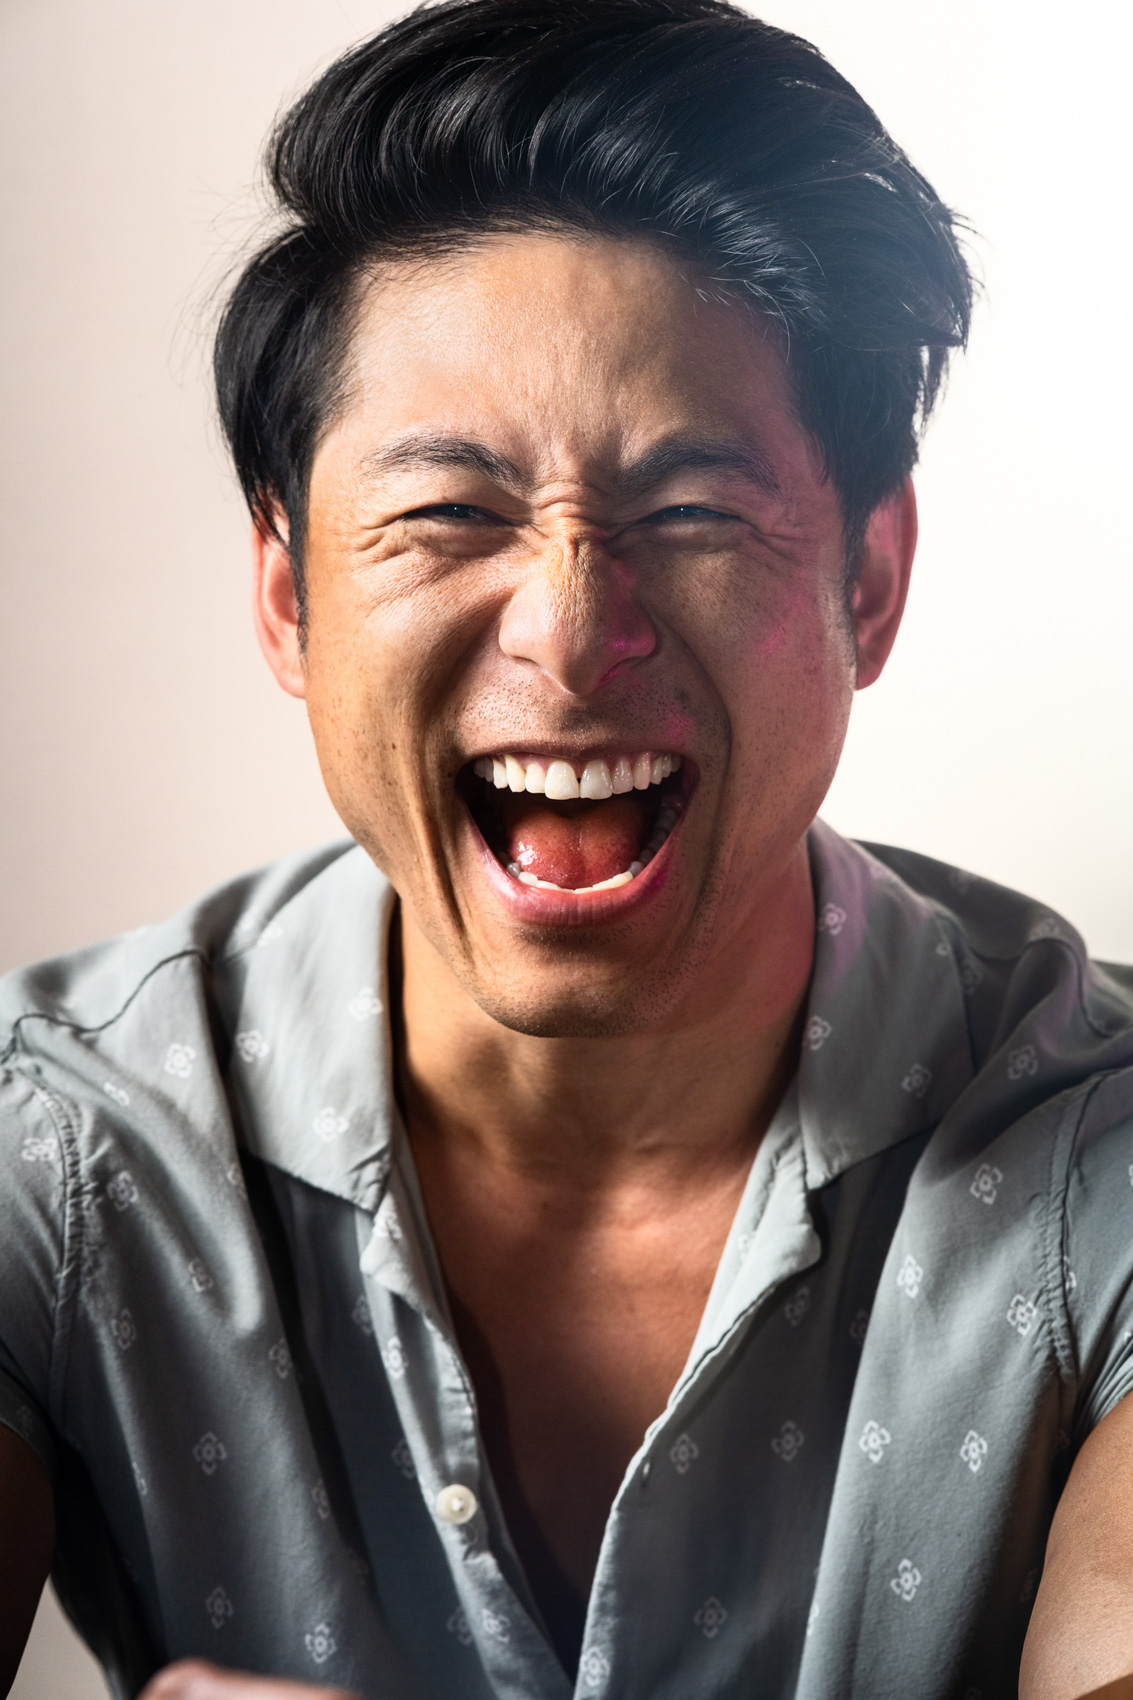 Laughing actor portrait in a studio in Los Angeles.